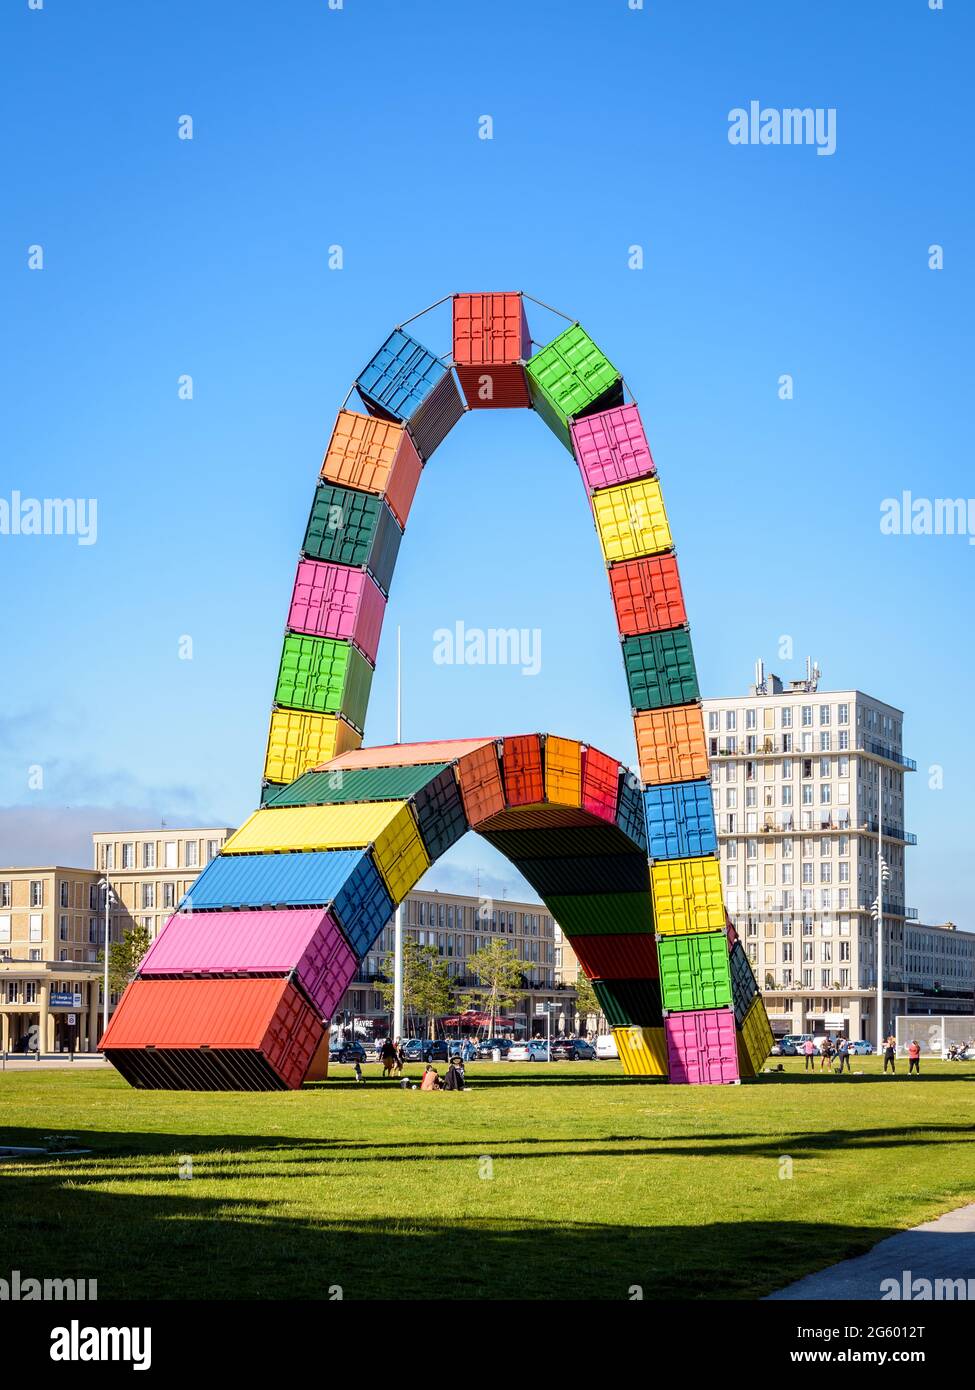 The "Catène de containers" is an art installation made of two arches of  containers in Le Havre, France Stock Photo - Alamy